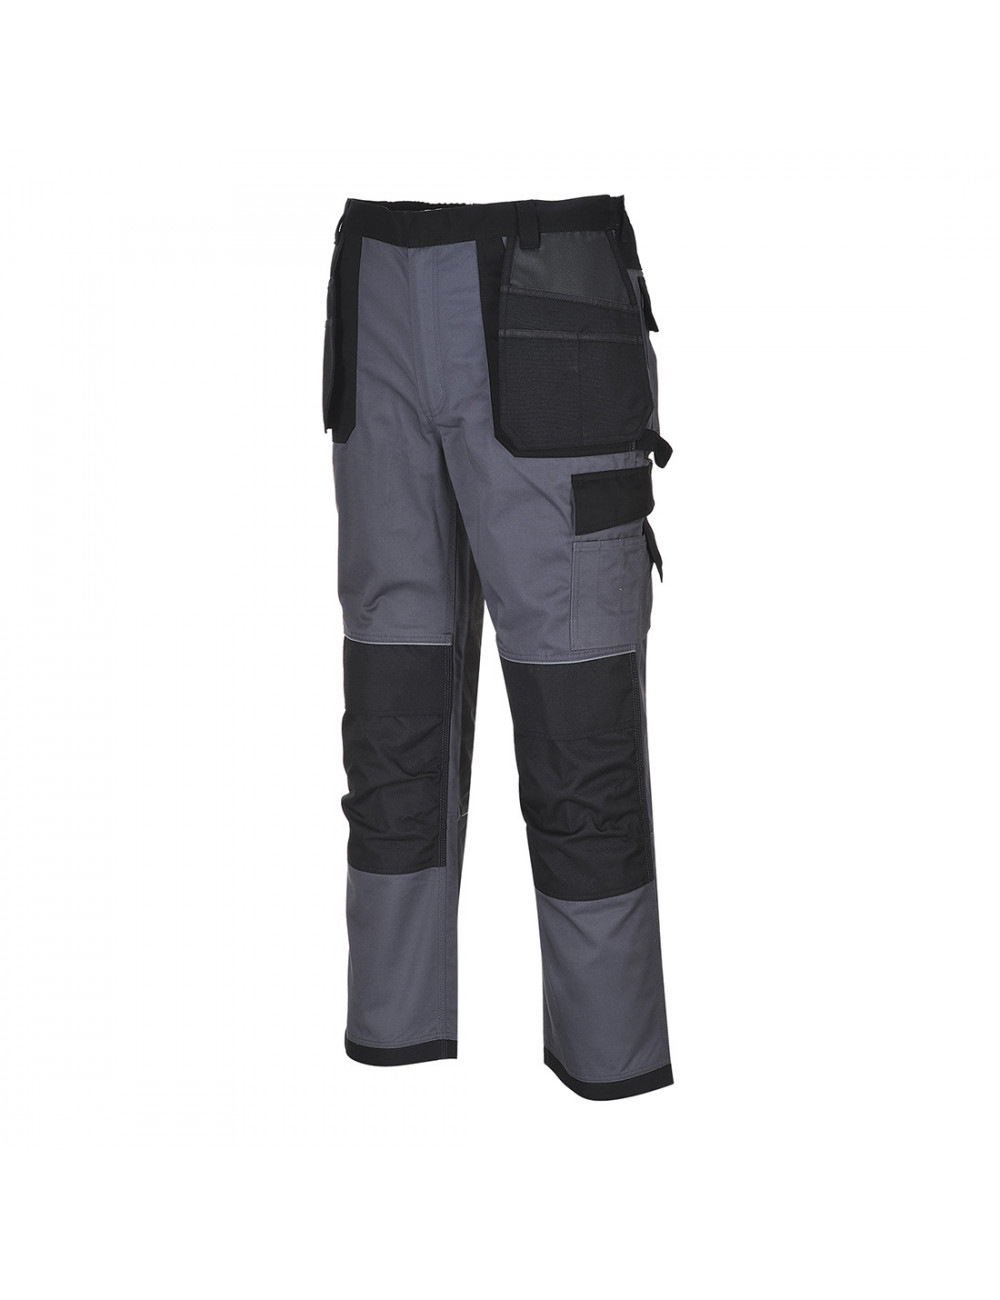 Dresden trousers with holster pockets graphite gray Portwest